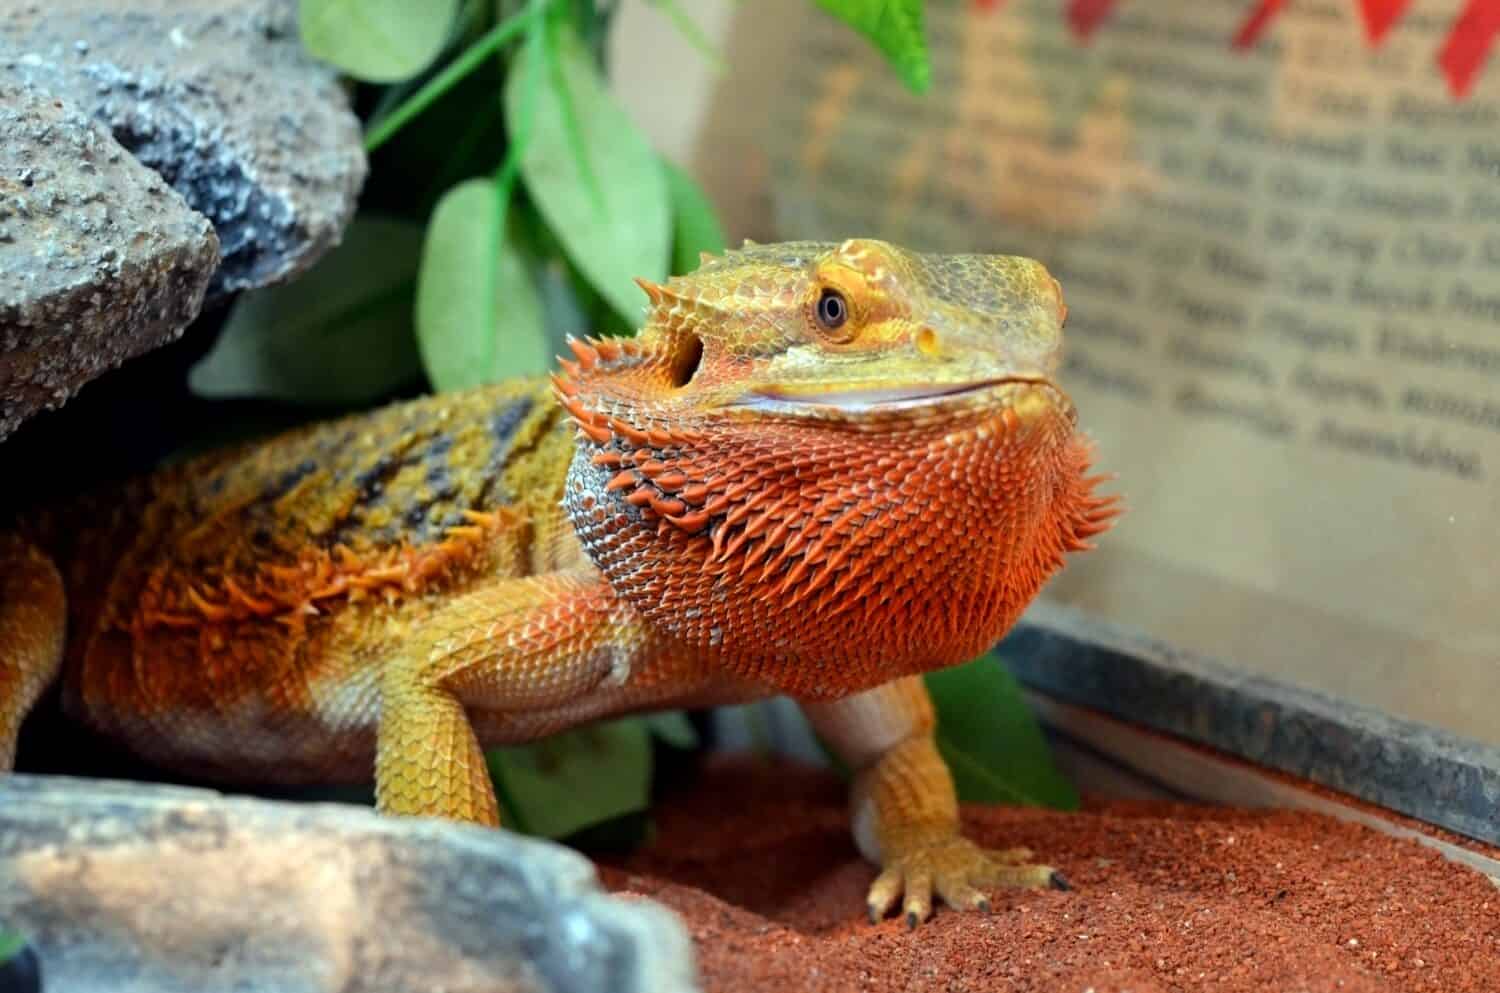 The central bearded dragon (Pogona vitticeps), also known as the inland bearded dragon